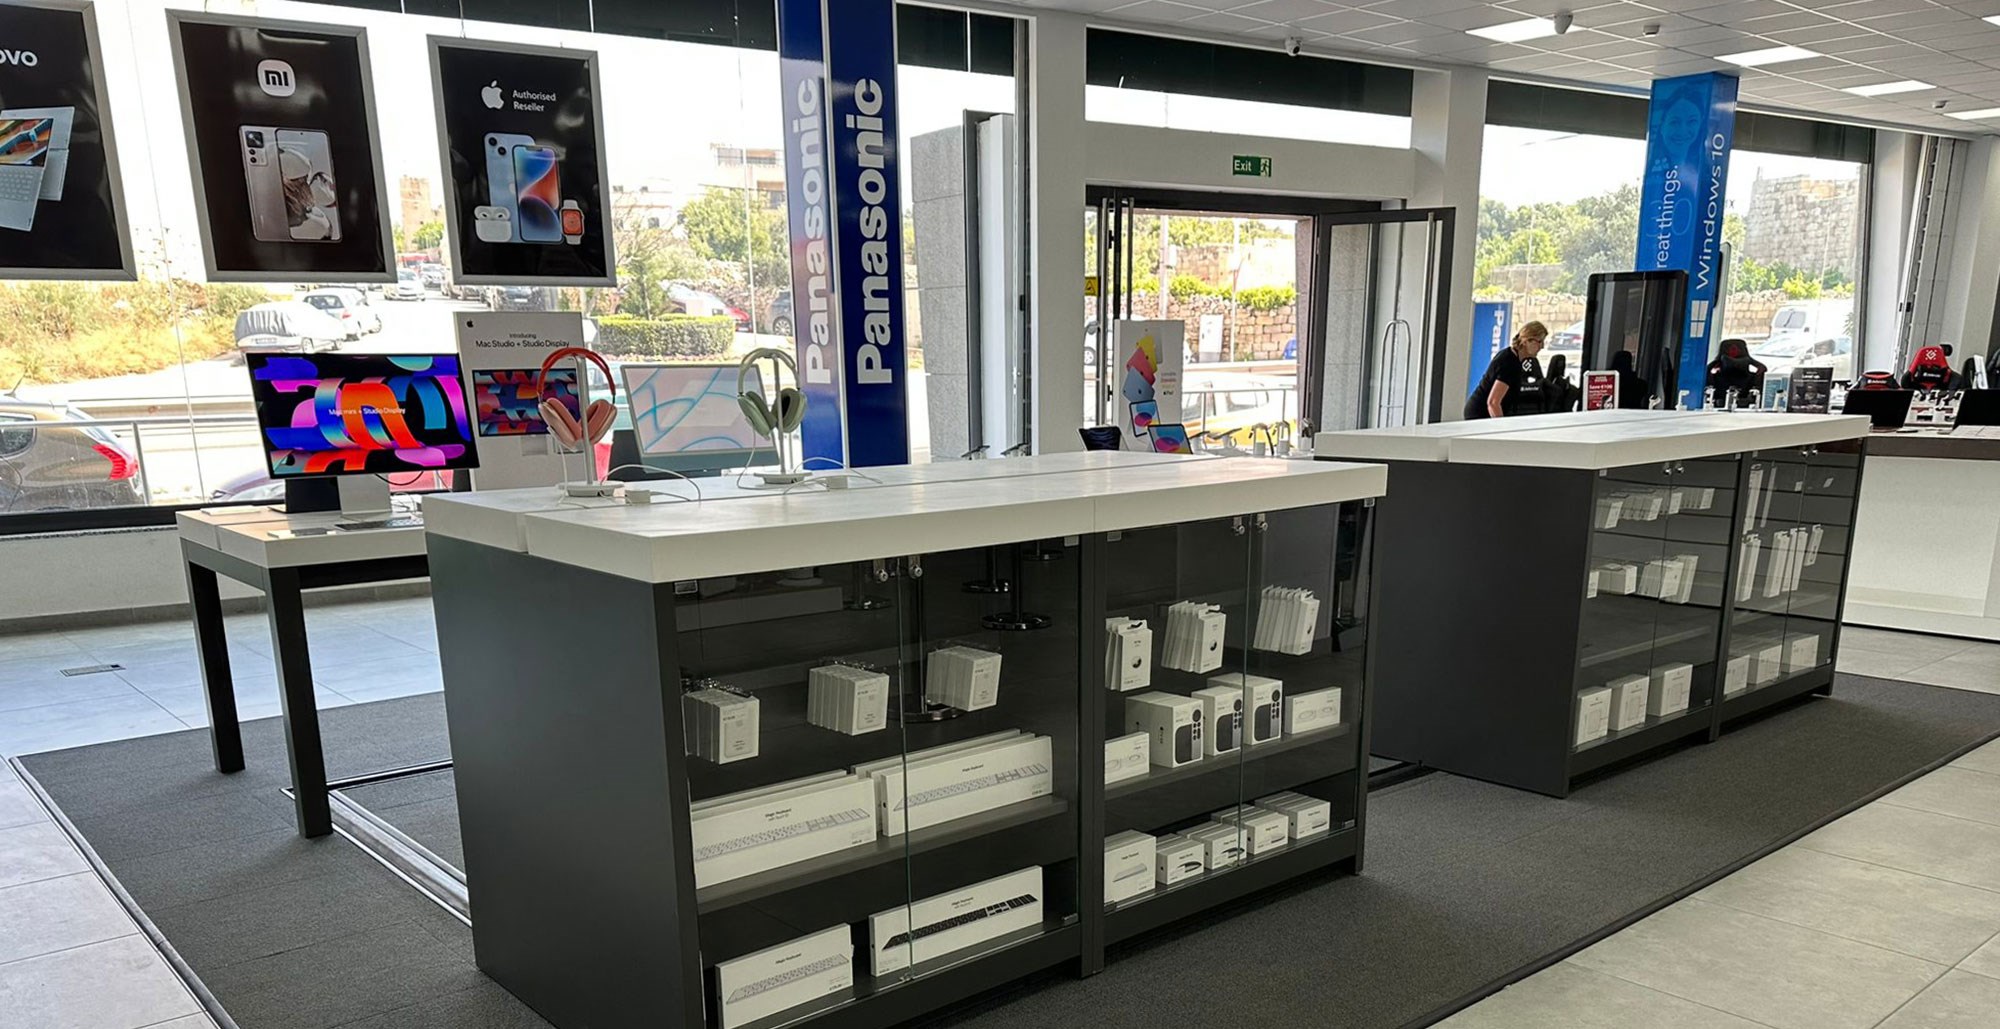 scan opens new Apple Authorized Reseller in Malta